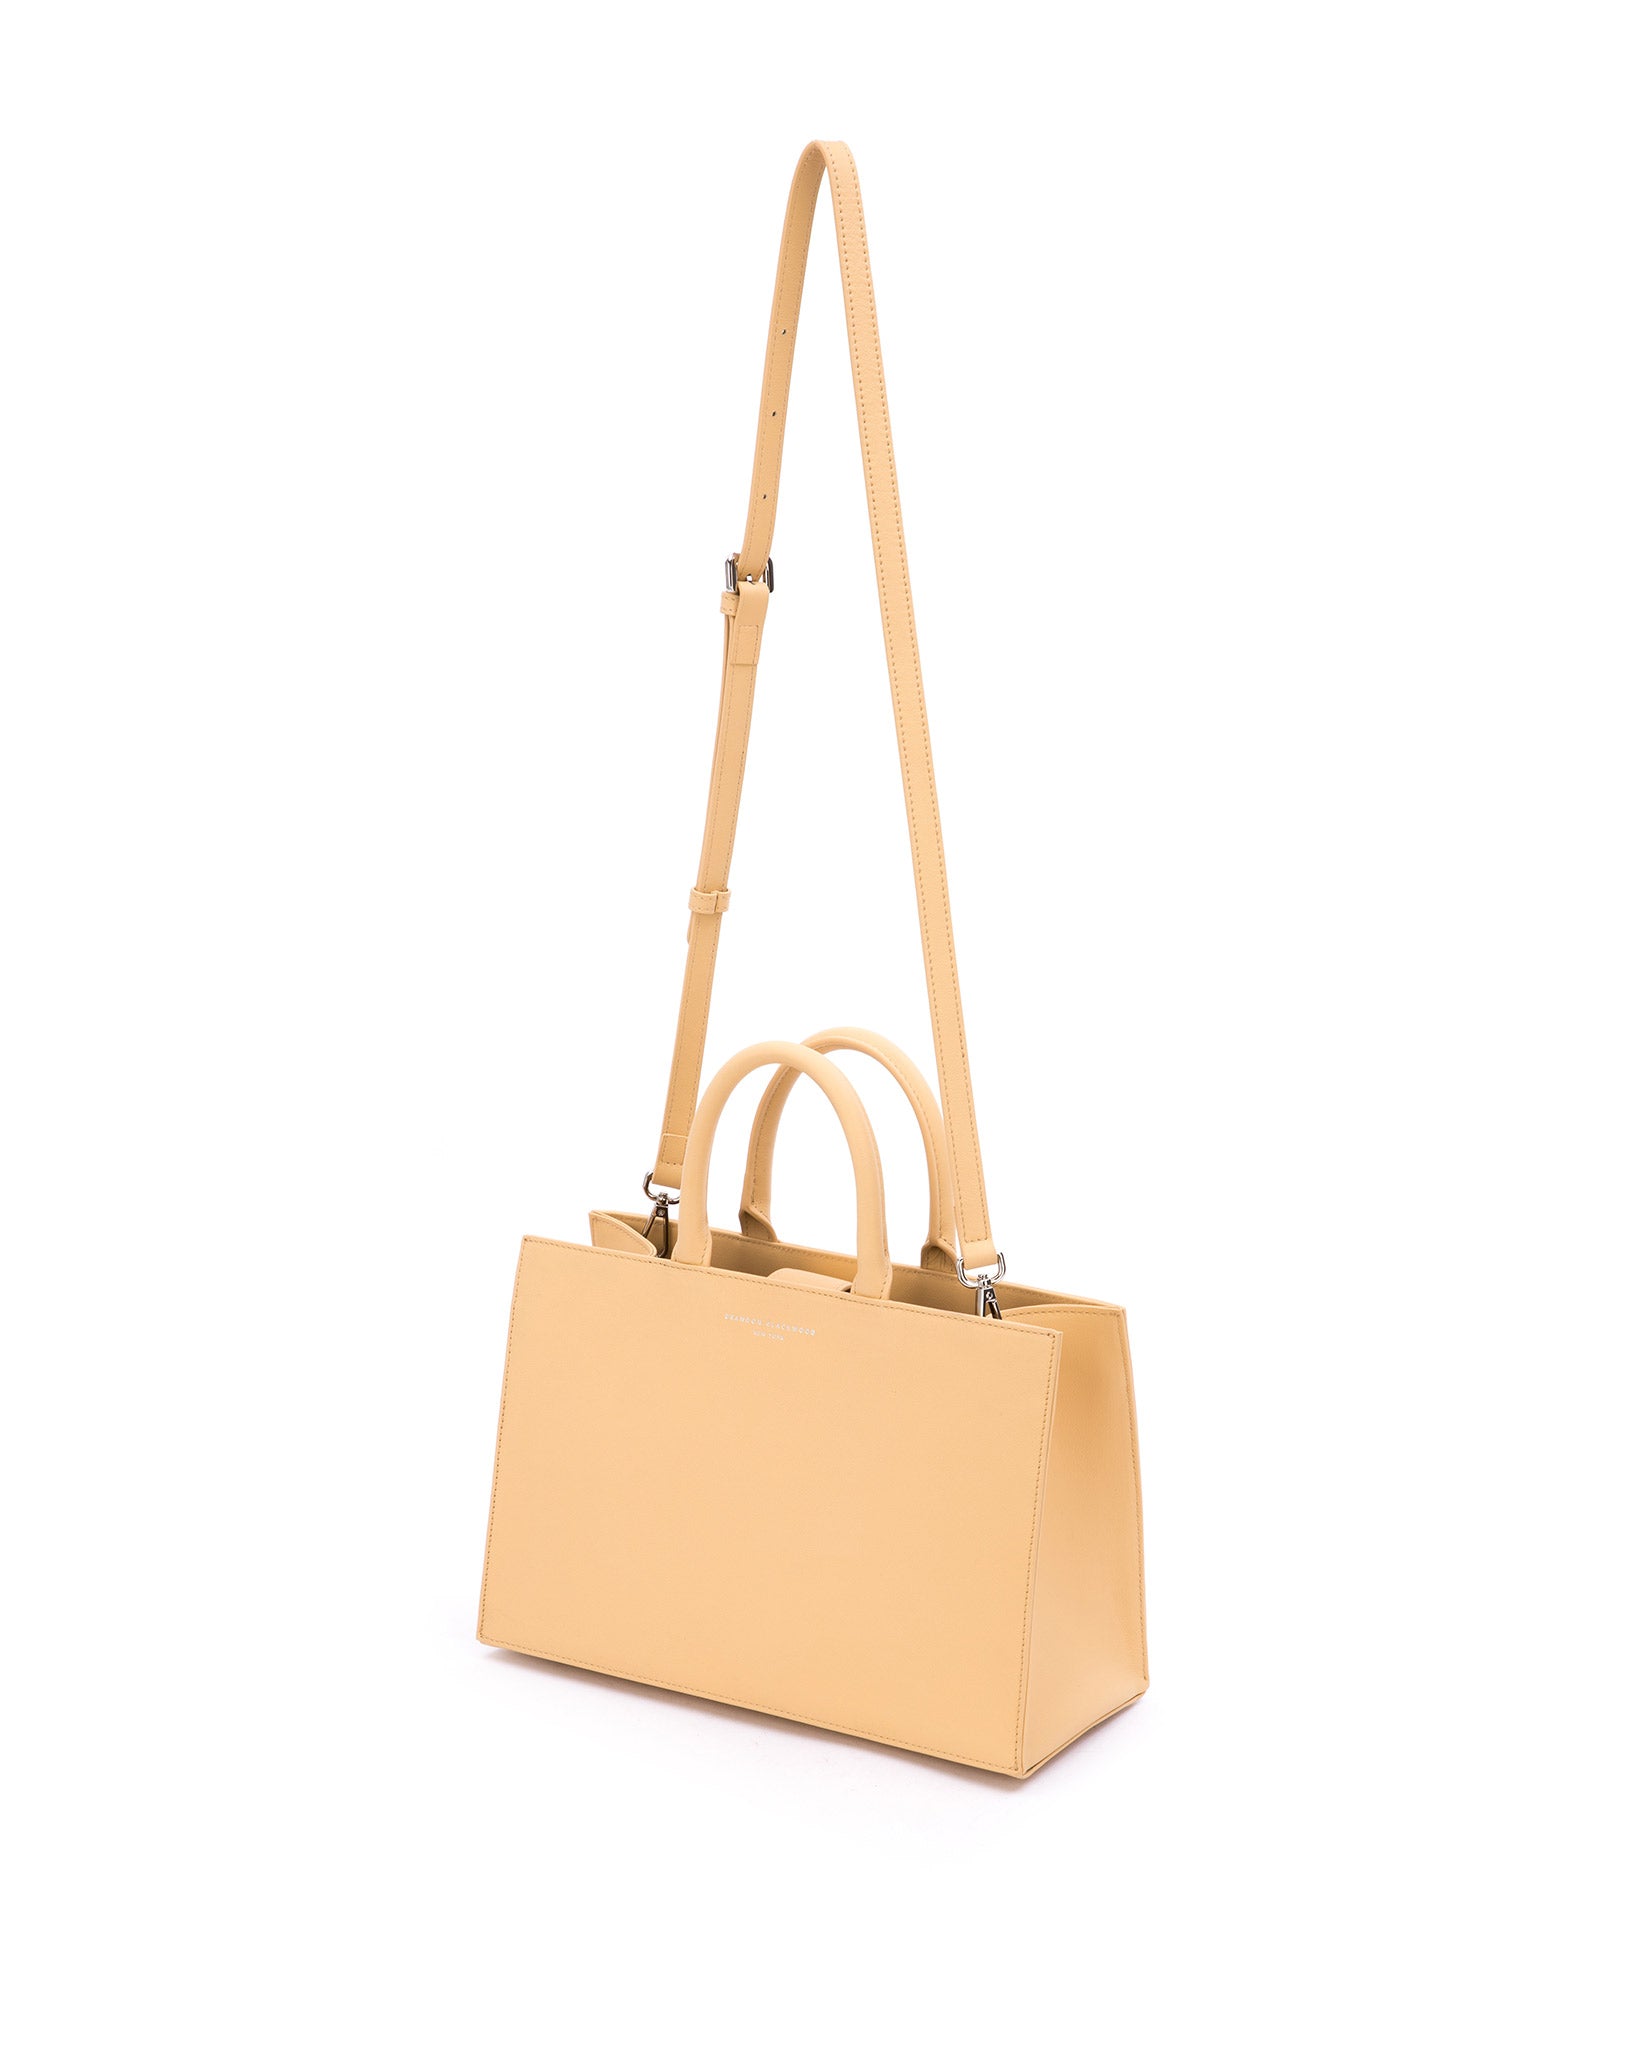 Brandon Blackwood New York - Marcy Ave Tote - Beige Leather